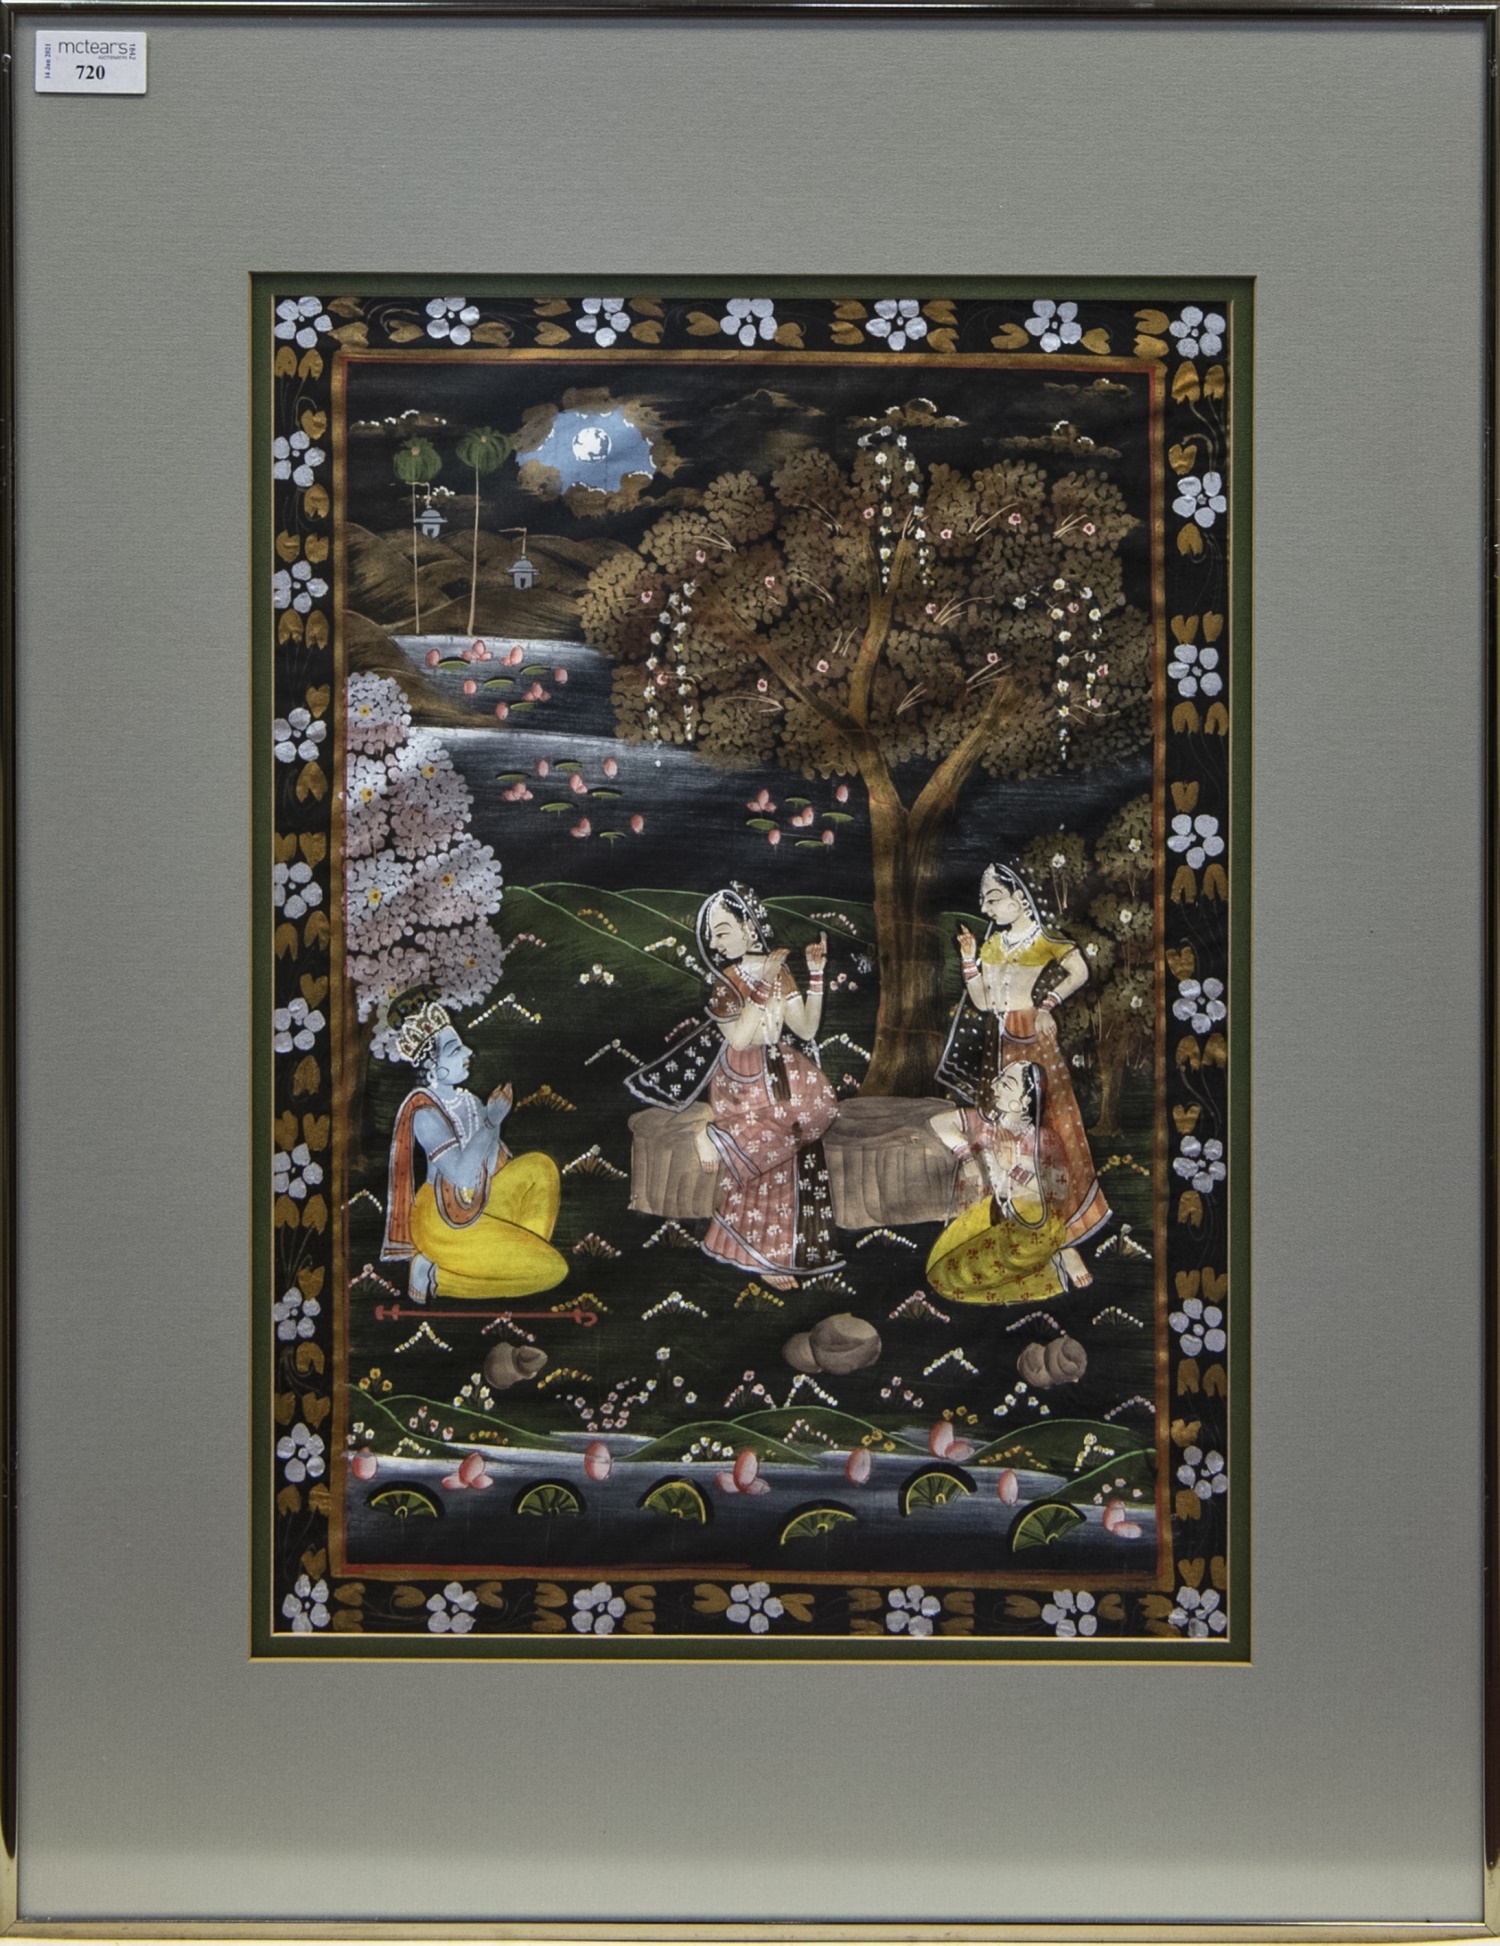 A 20TH CENTURY INDIAN PAINTING ON FABRIC